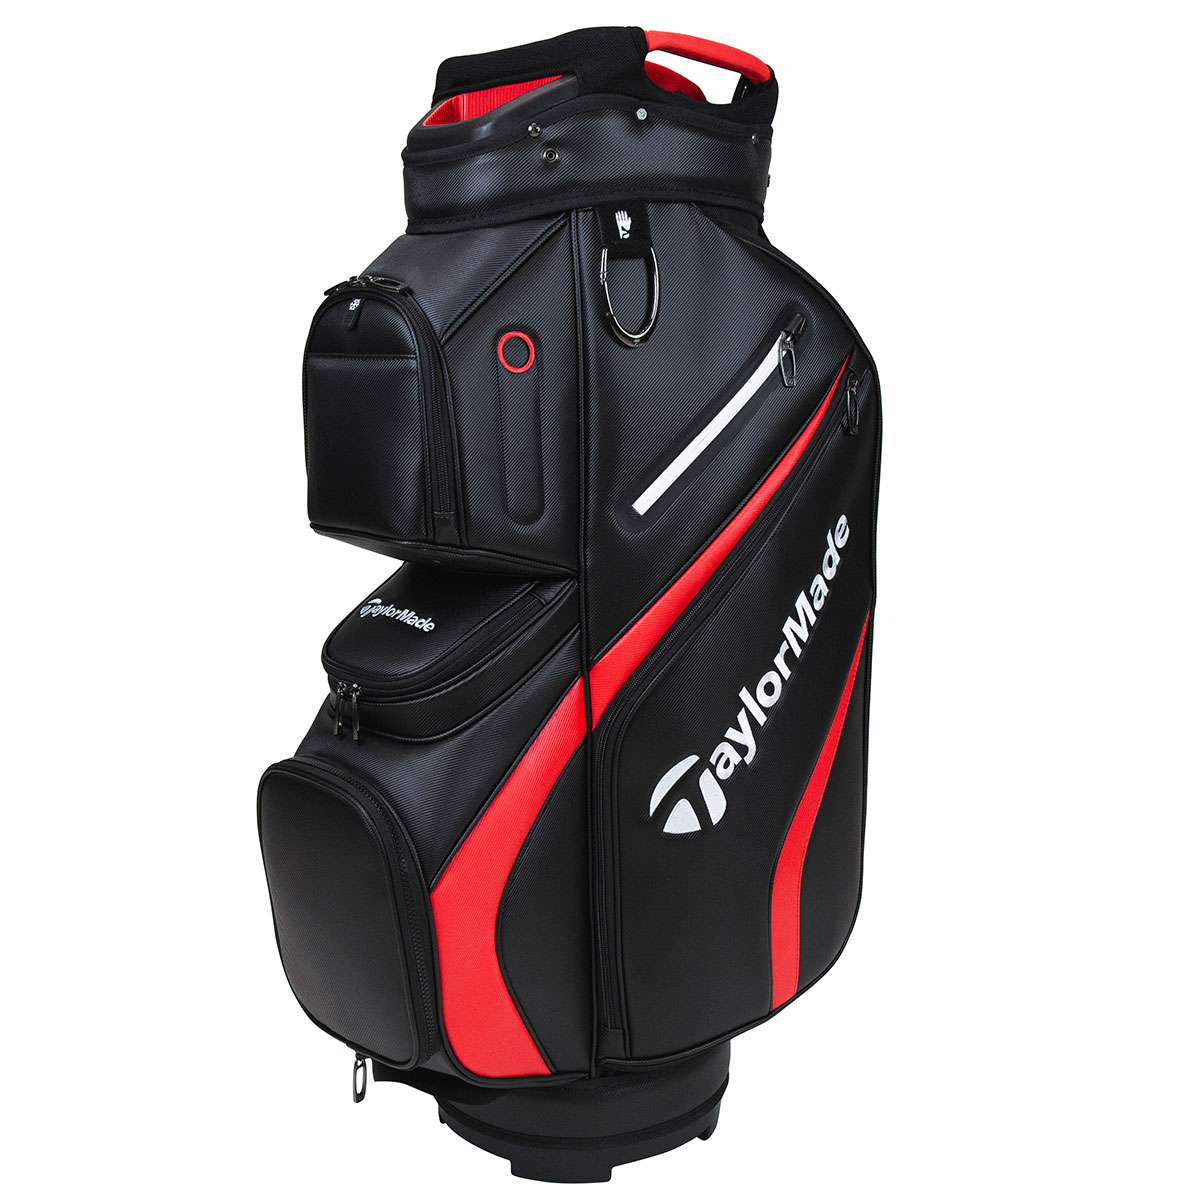 TaylorMade Deluxe Golf Cart Bag from american golf